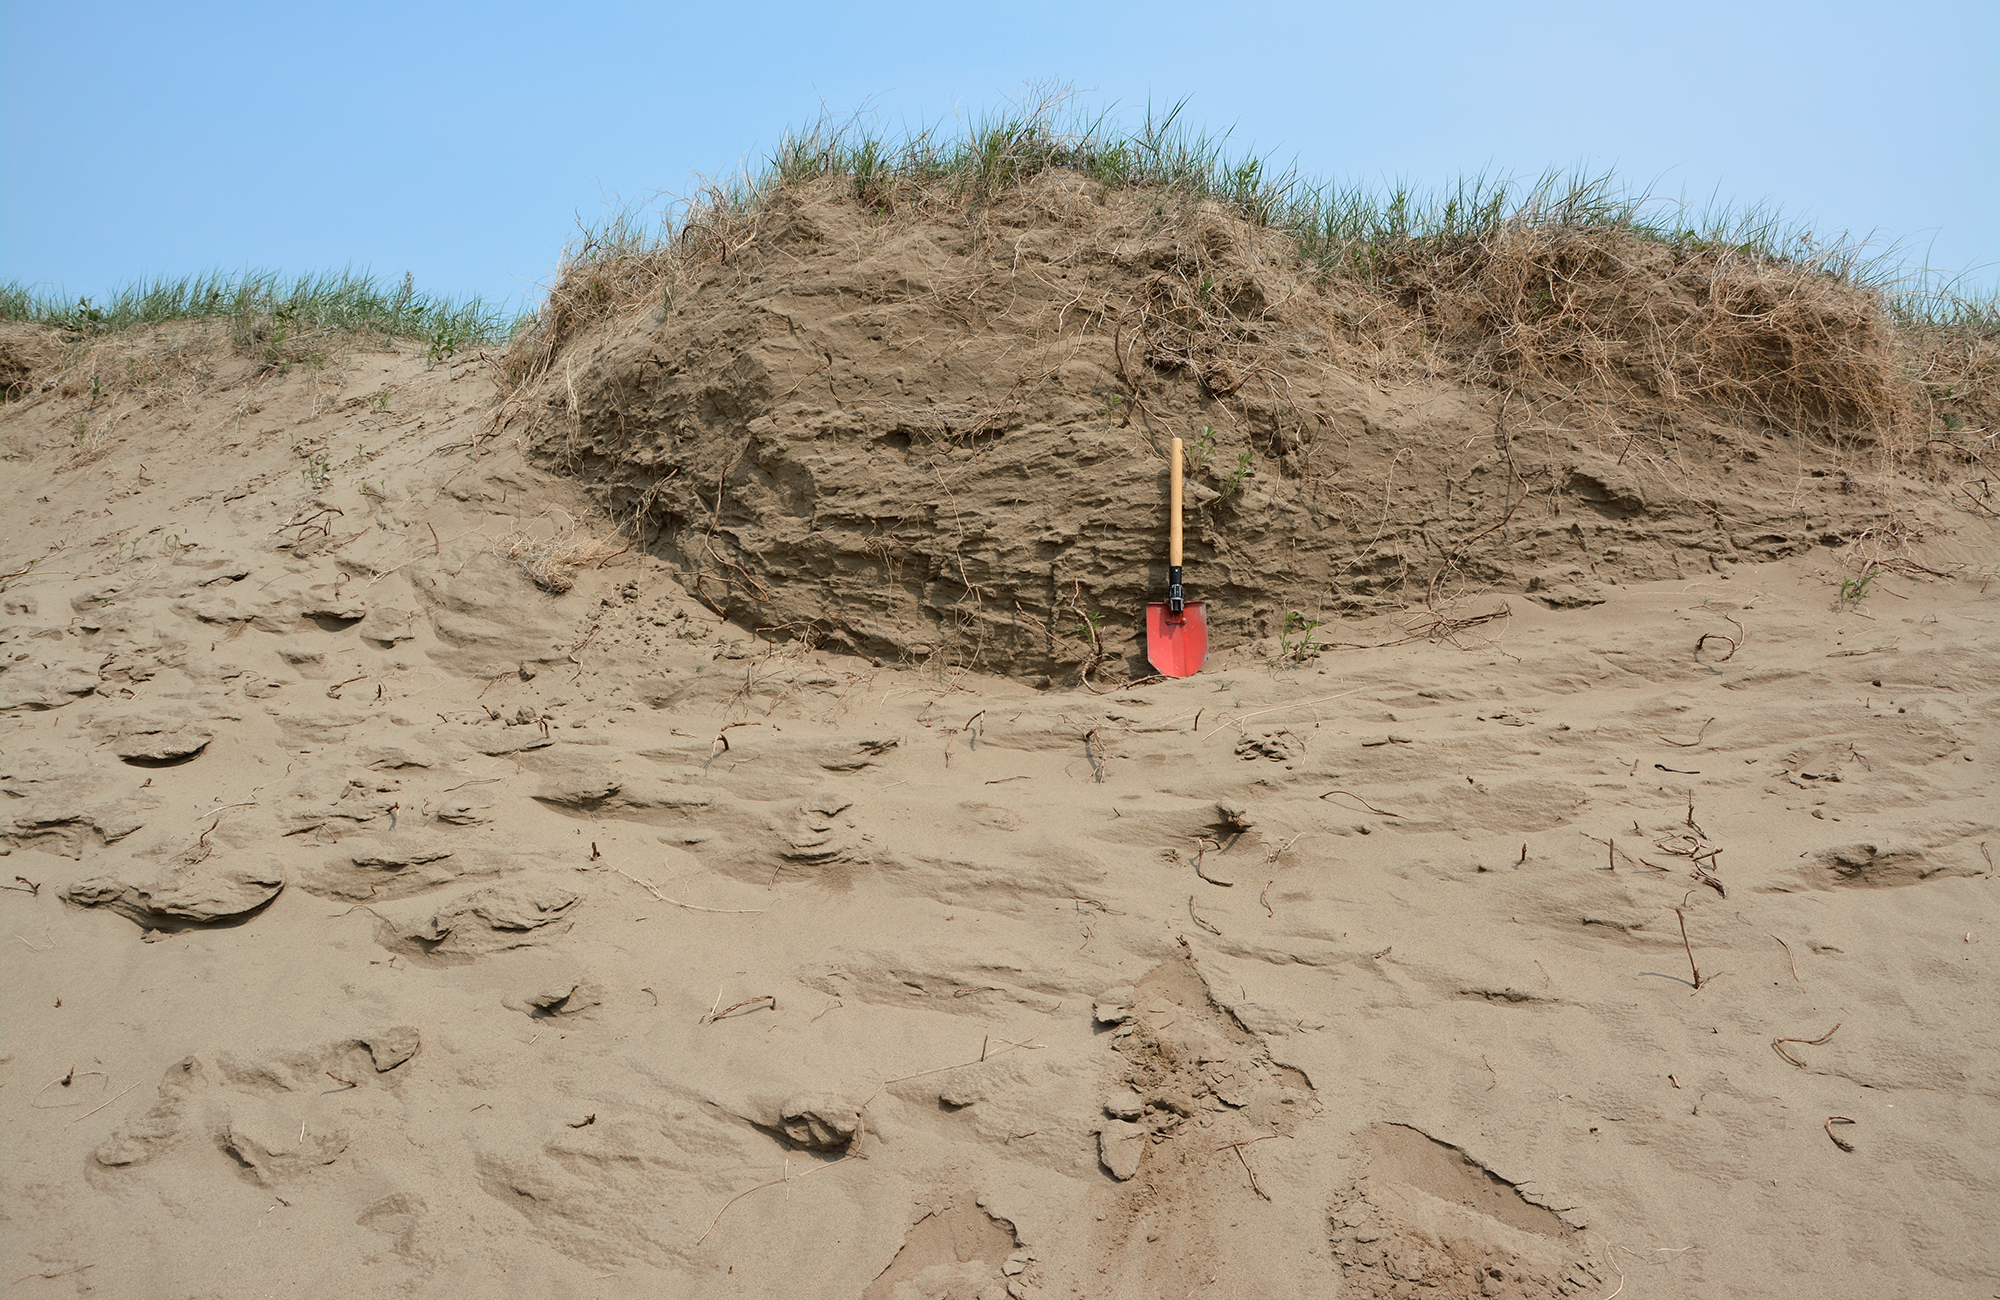 A large hill of sand covered by grass on the top against a blue sky background. A red shovel is placed for scale.